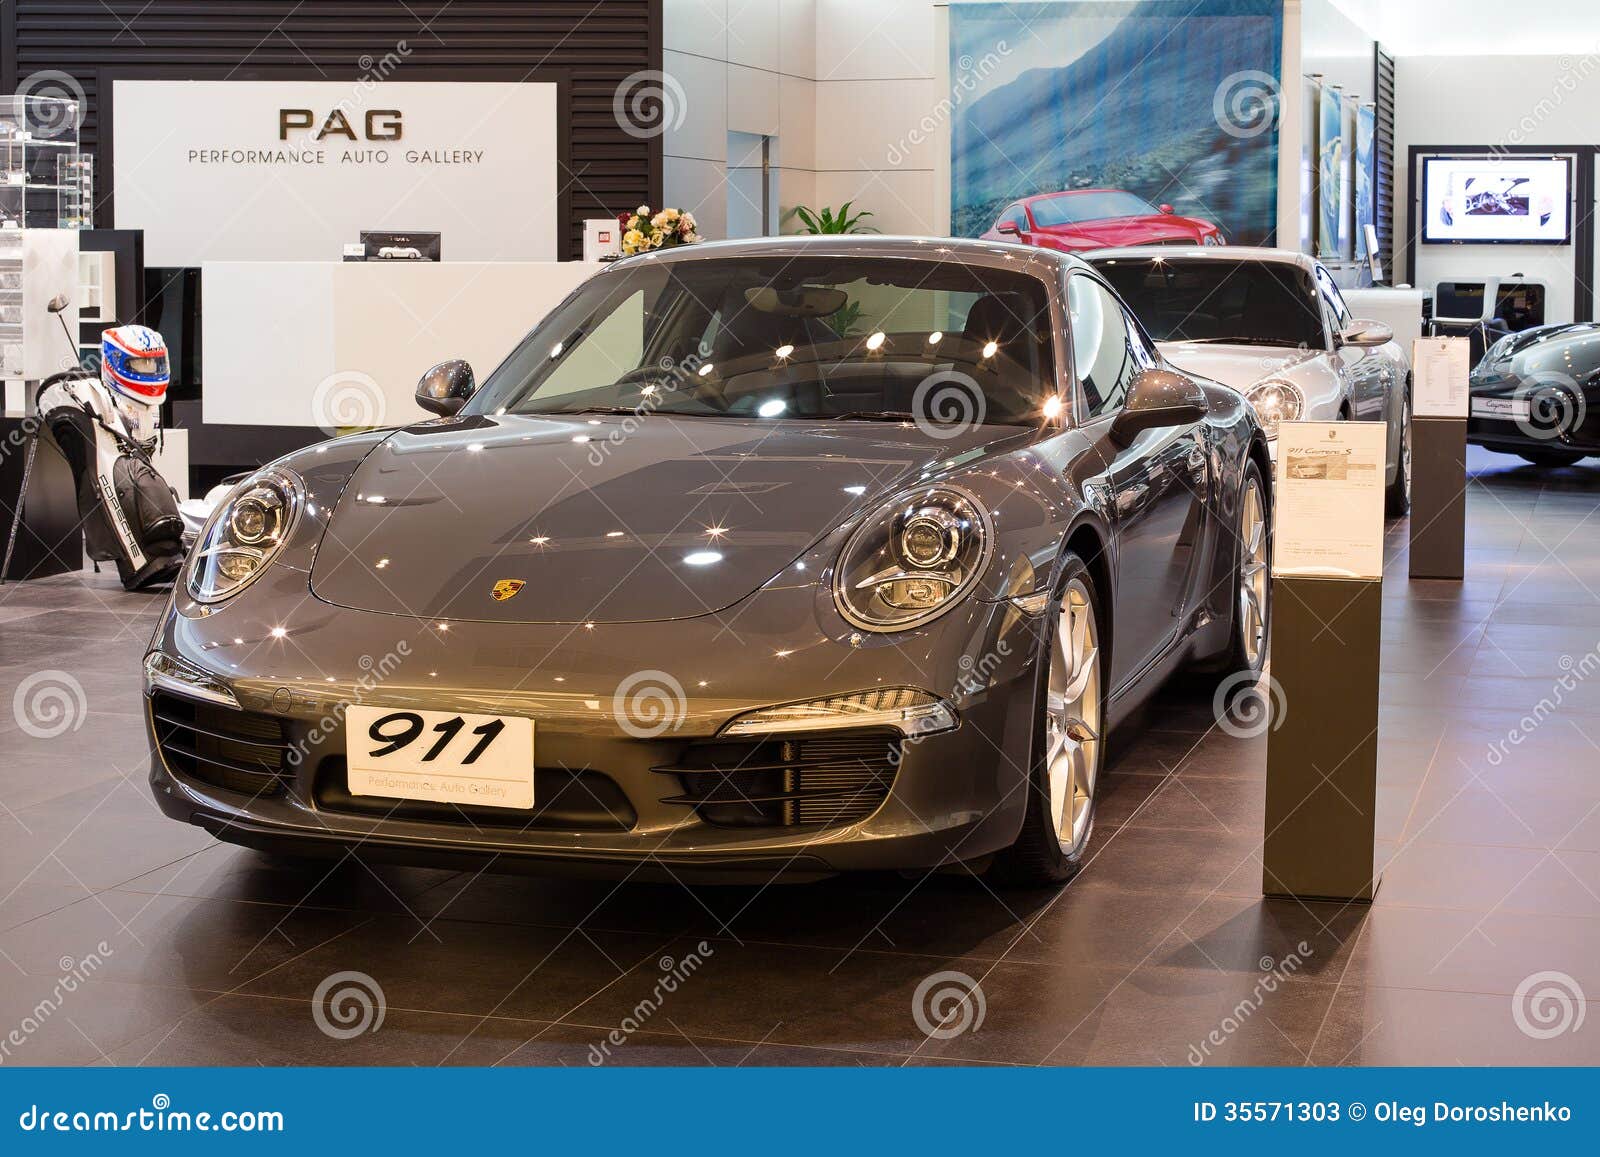 Porsche 911 Carrera S Car On Display At The Siam Paragon Mall In